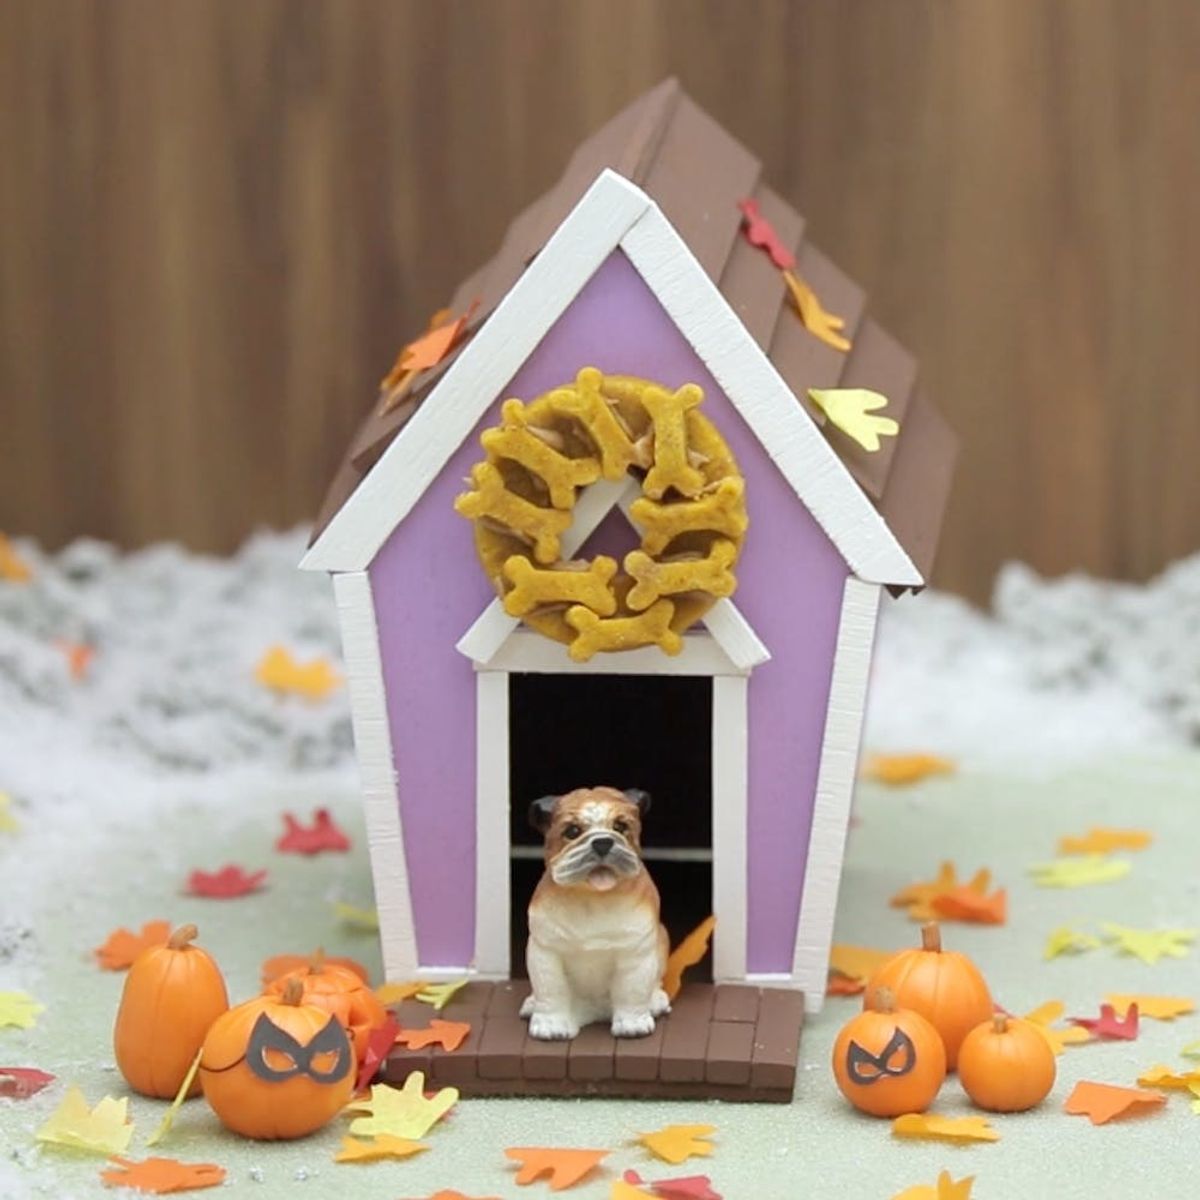 Make It Mini: How to DIY Tiny Dog Treats for Your Furry Friend